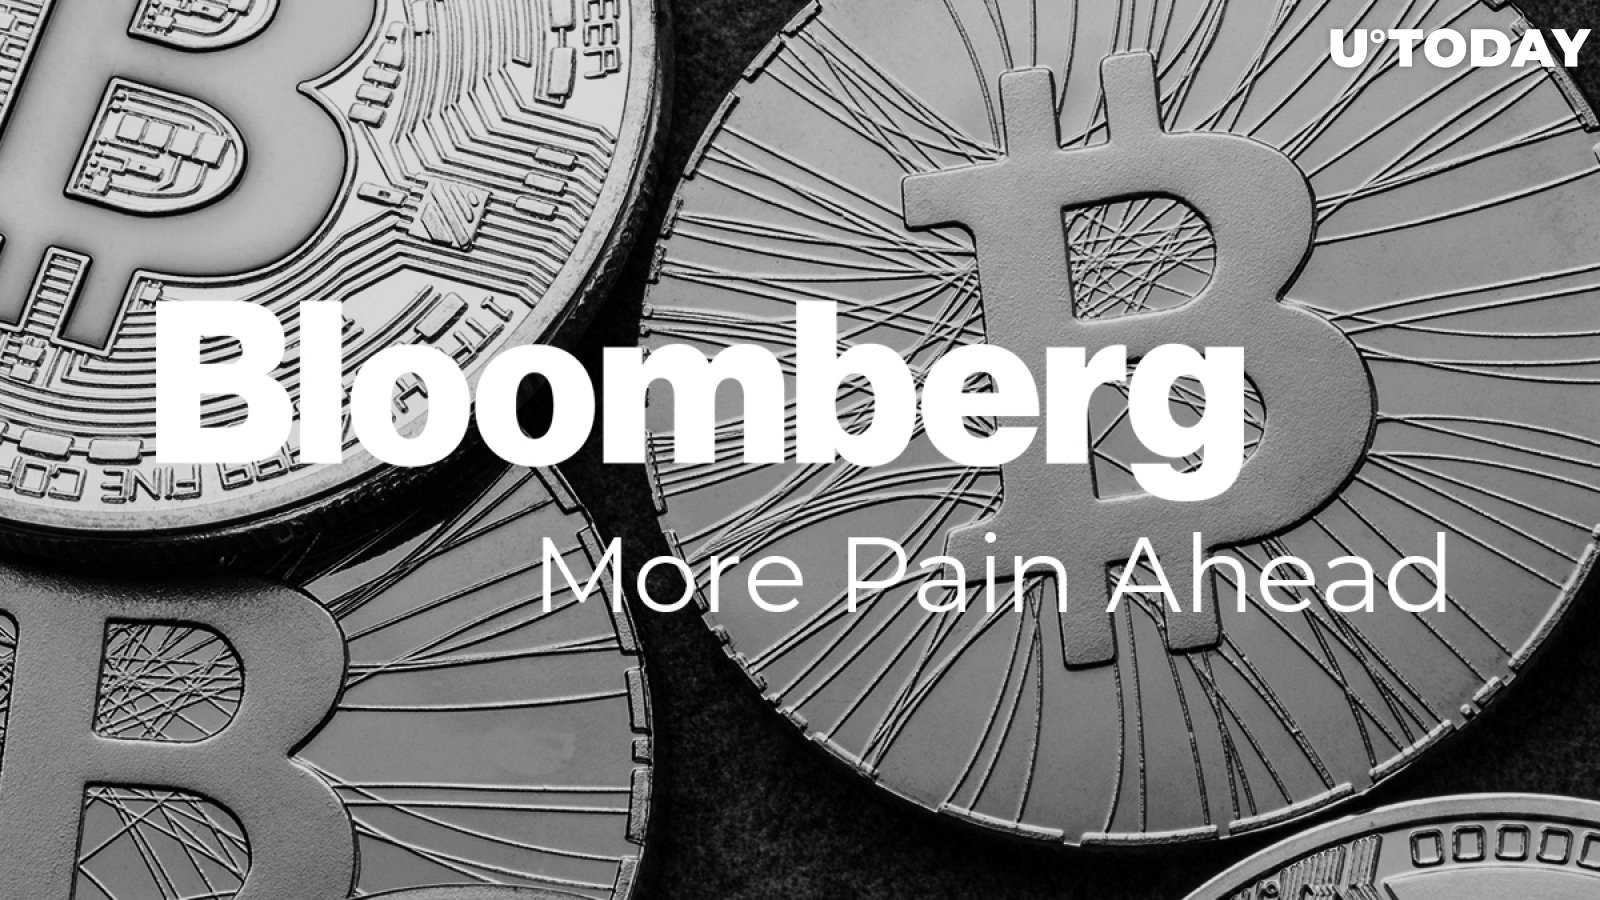 "More Pain Ahead" for Bitcoin Price: Bloomberg